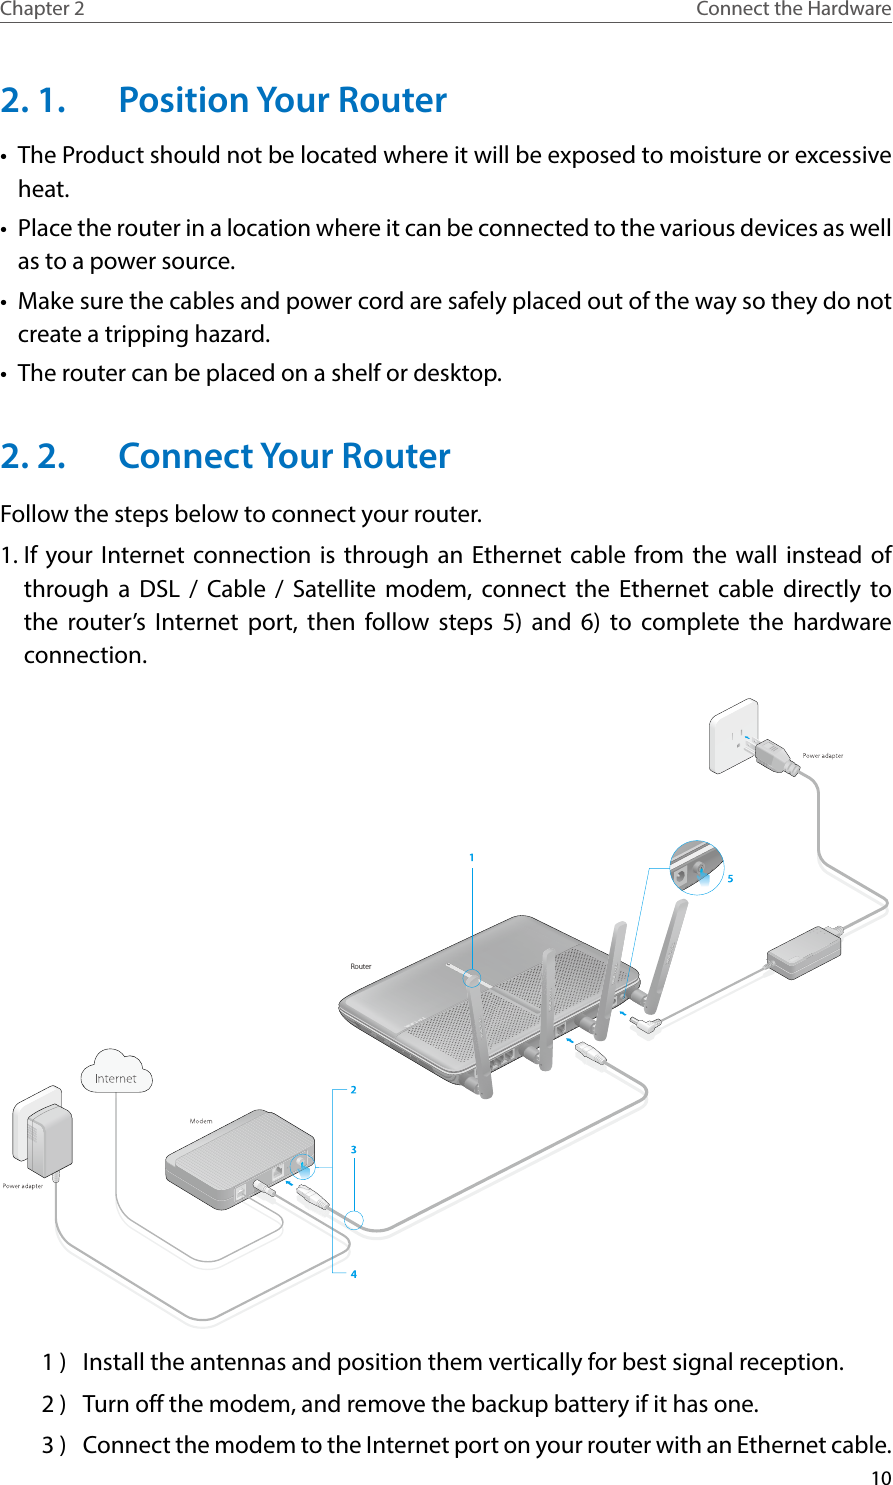 10Chapter 2 Connect the Hardware2. 1.  Position Your Router•  The Product should not be located where it will be exposed to moisture or excessive heat.•  Place the router in a location where it can be connected to the various devices as well as to a power source.•  Make sure the cables and power cord are safely placed out of the way so they do not create a tripping hazard.•  The router can be placed on a shelf or desktop.2. 2.  Connect Your RouterFollow the steps below to connect your router.1. If your Internet connection is through an Ethernet cable from the wall instead of through a DSL / Cable / Satellite modem, connect the Ethernet cable directly to the router’s Internet port, then follow steps 5) and 6) to complete the hardware connection.Router1 )  Install the antennas and position them vertically for best signal reception.2 )  Turn off the modem, and remove the backup battery if it has one.3 )  Connect the modem to the Internet port on your router with an Ethernet cable.